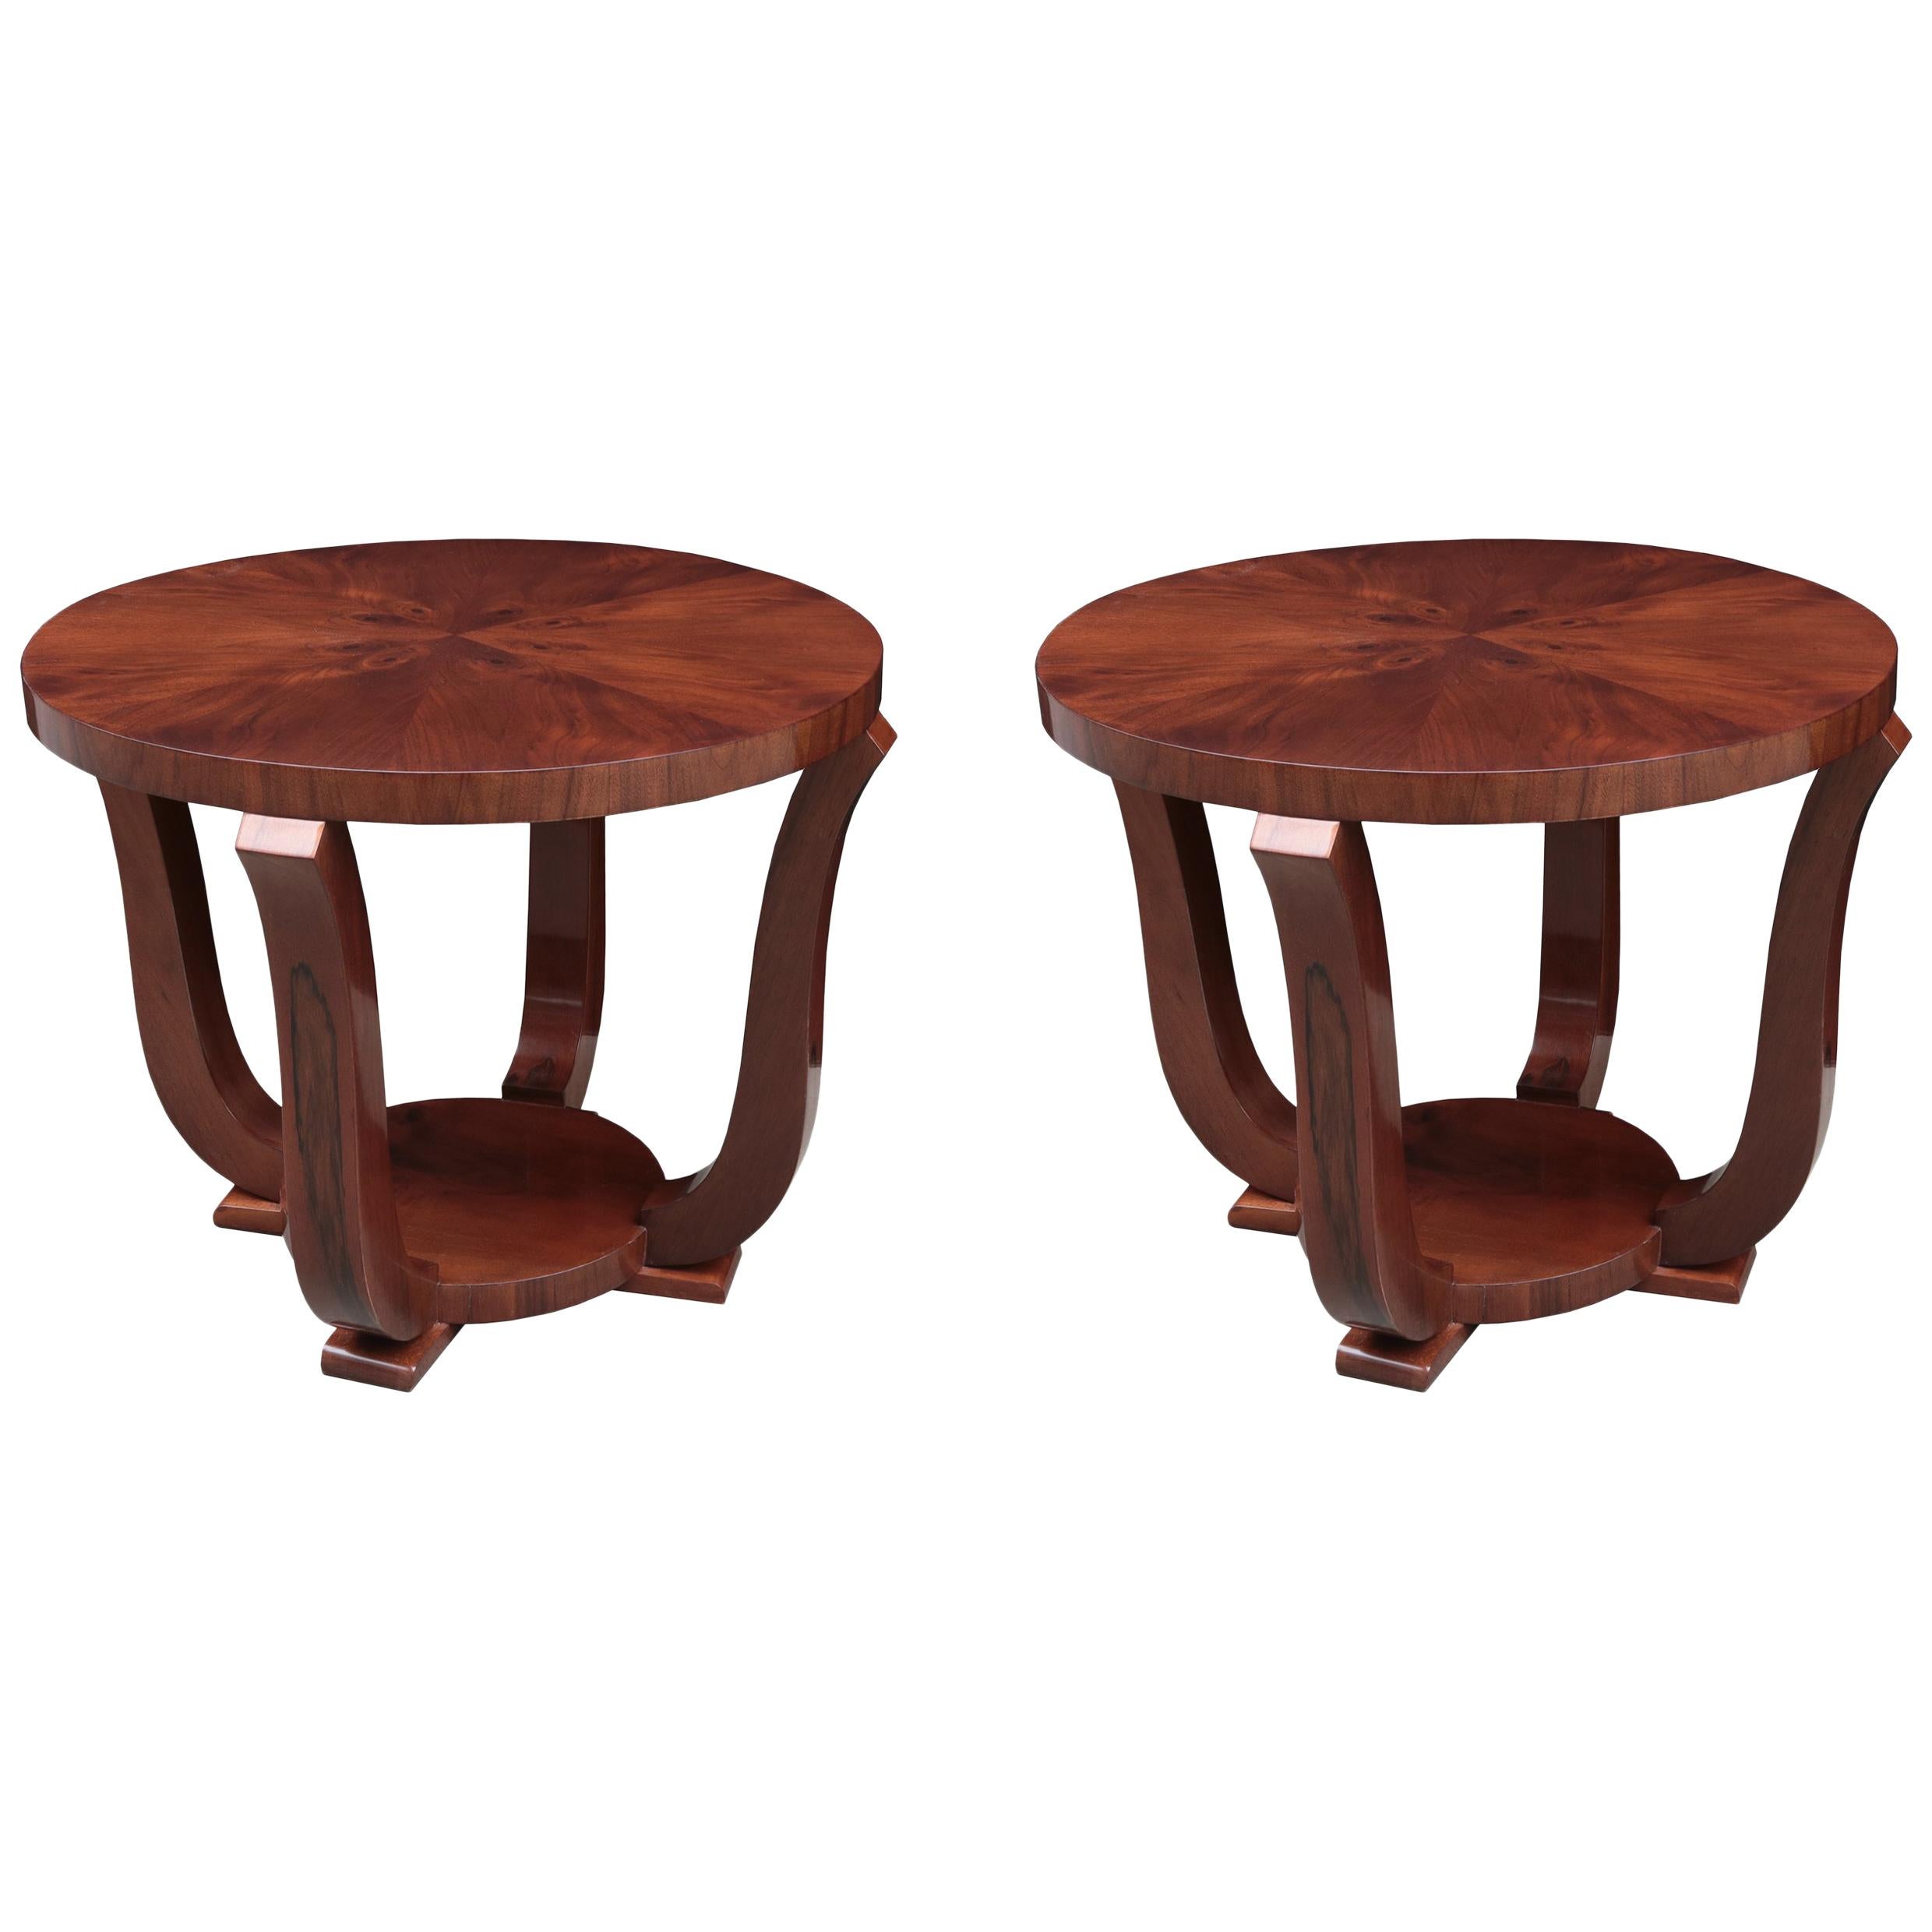 Pair of Art Deco Round Side Tables